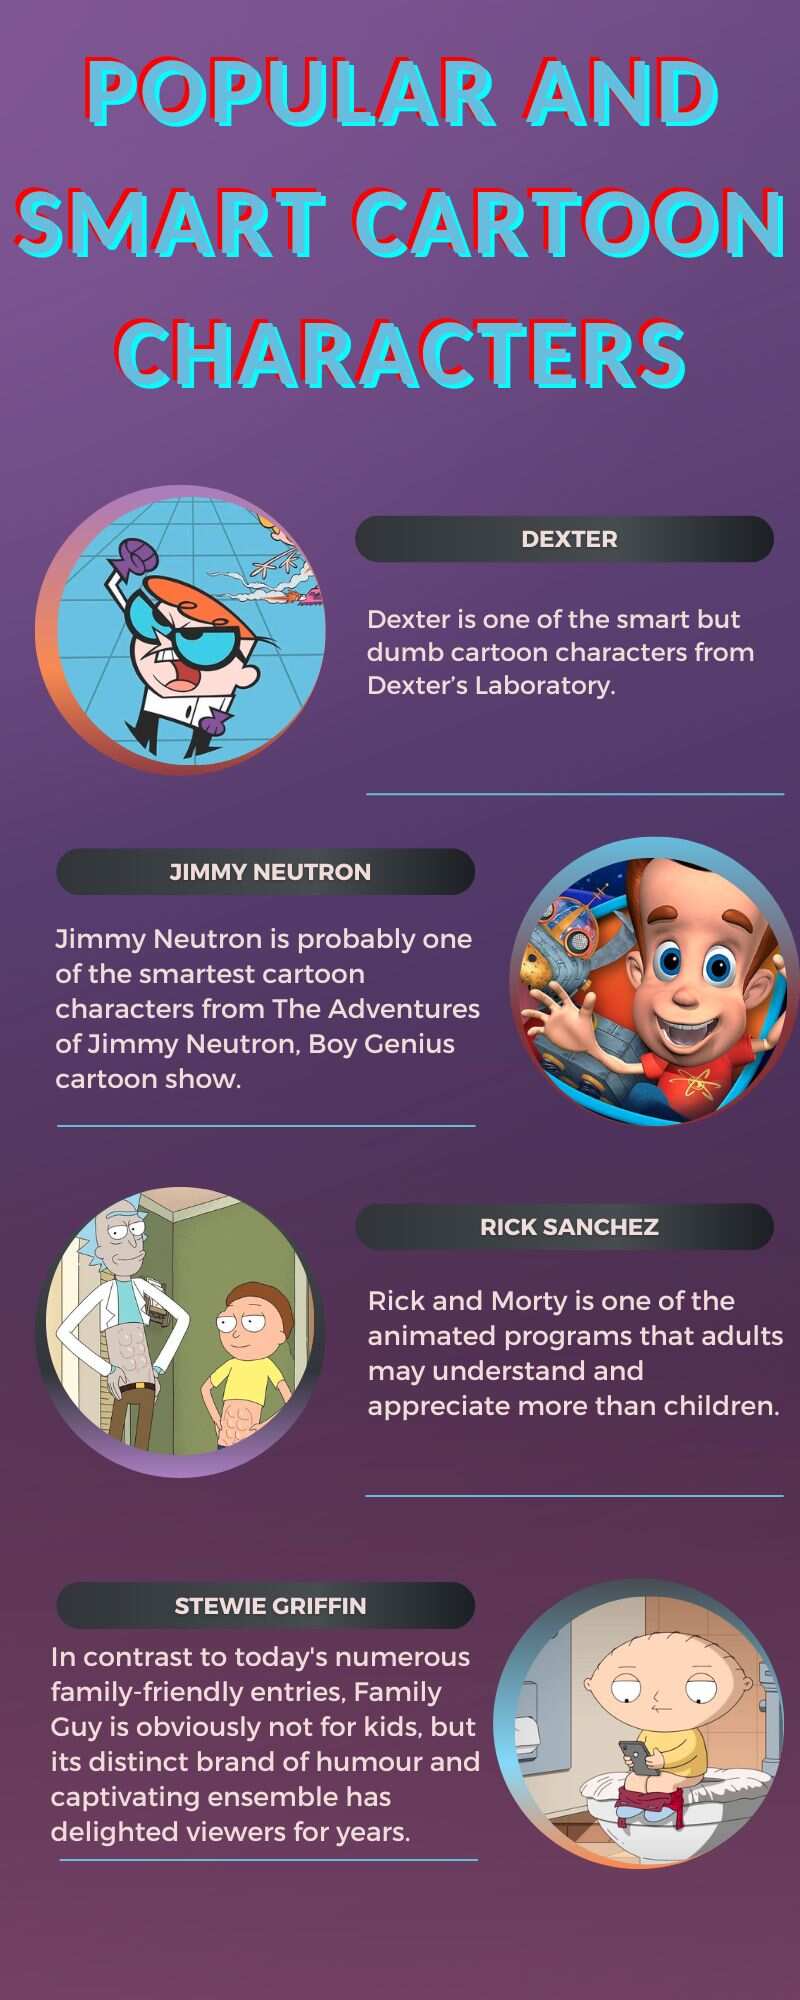 Popular and smart cartoon characters